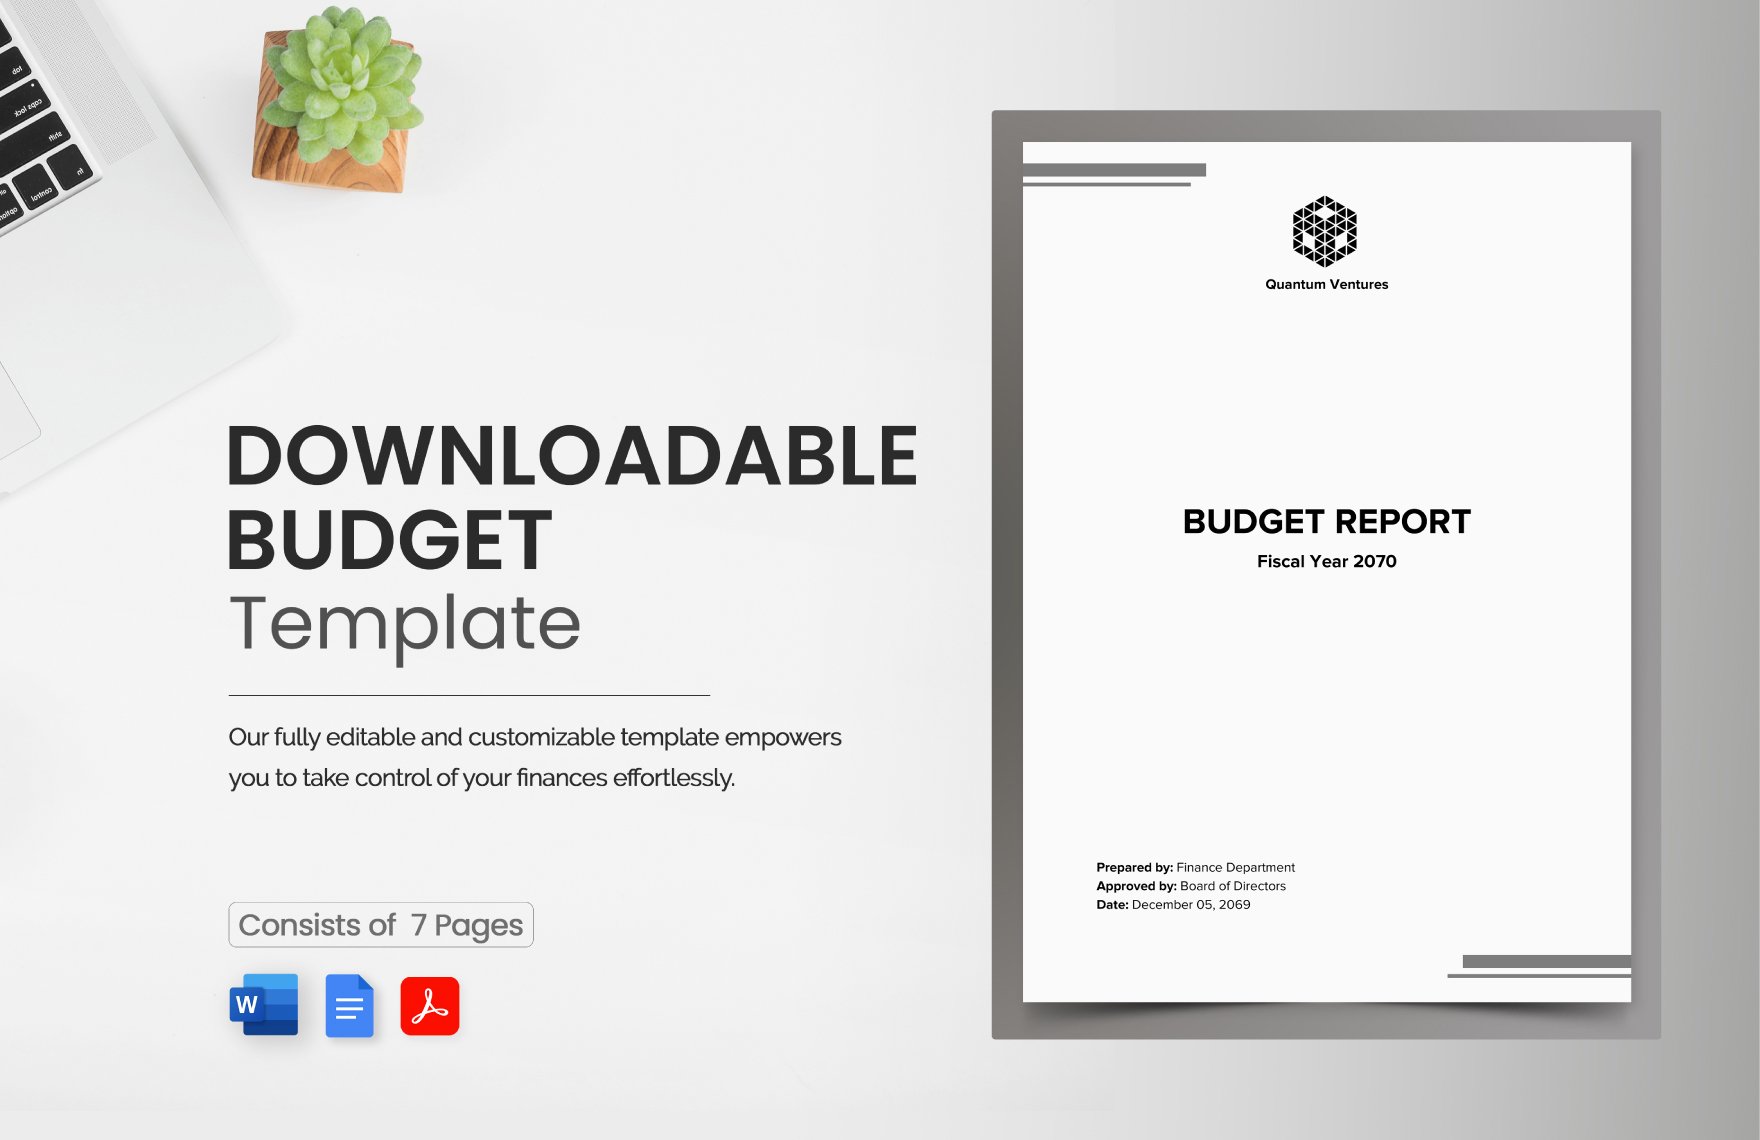 Downloadable Budget Template